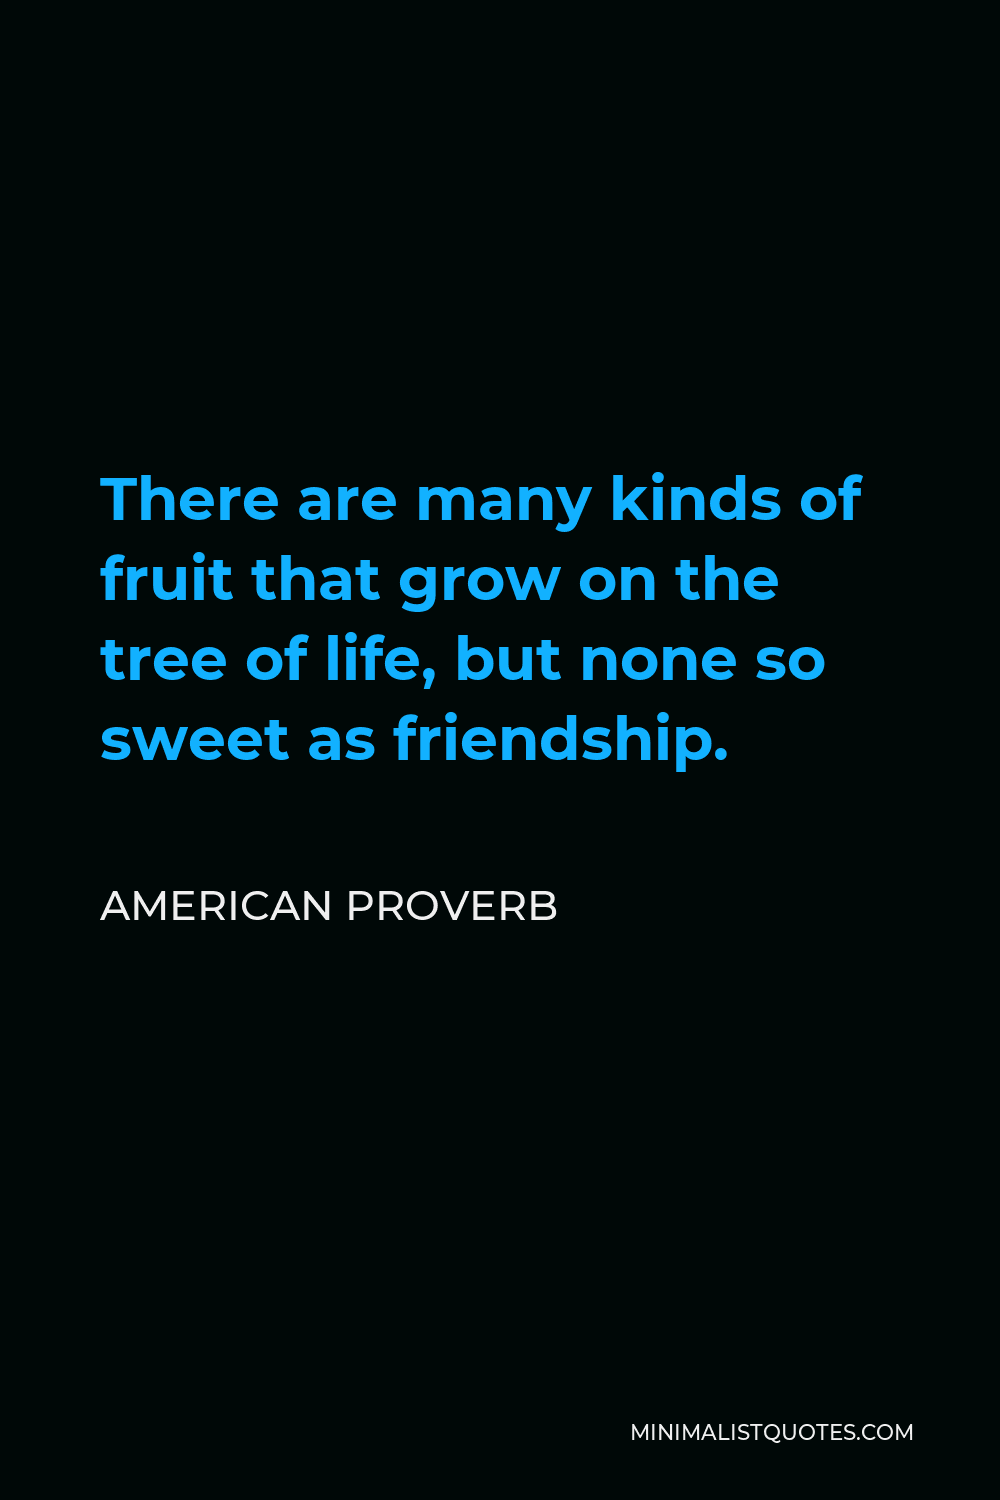 American Proverb Quote - There are many kinds of fruit that grow on the tree of life, but none so sweet as friendship.